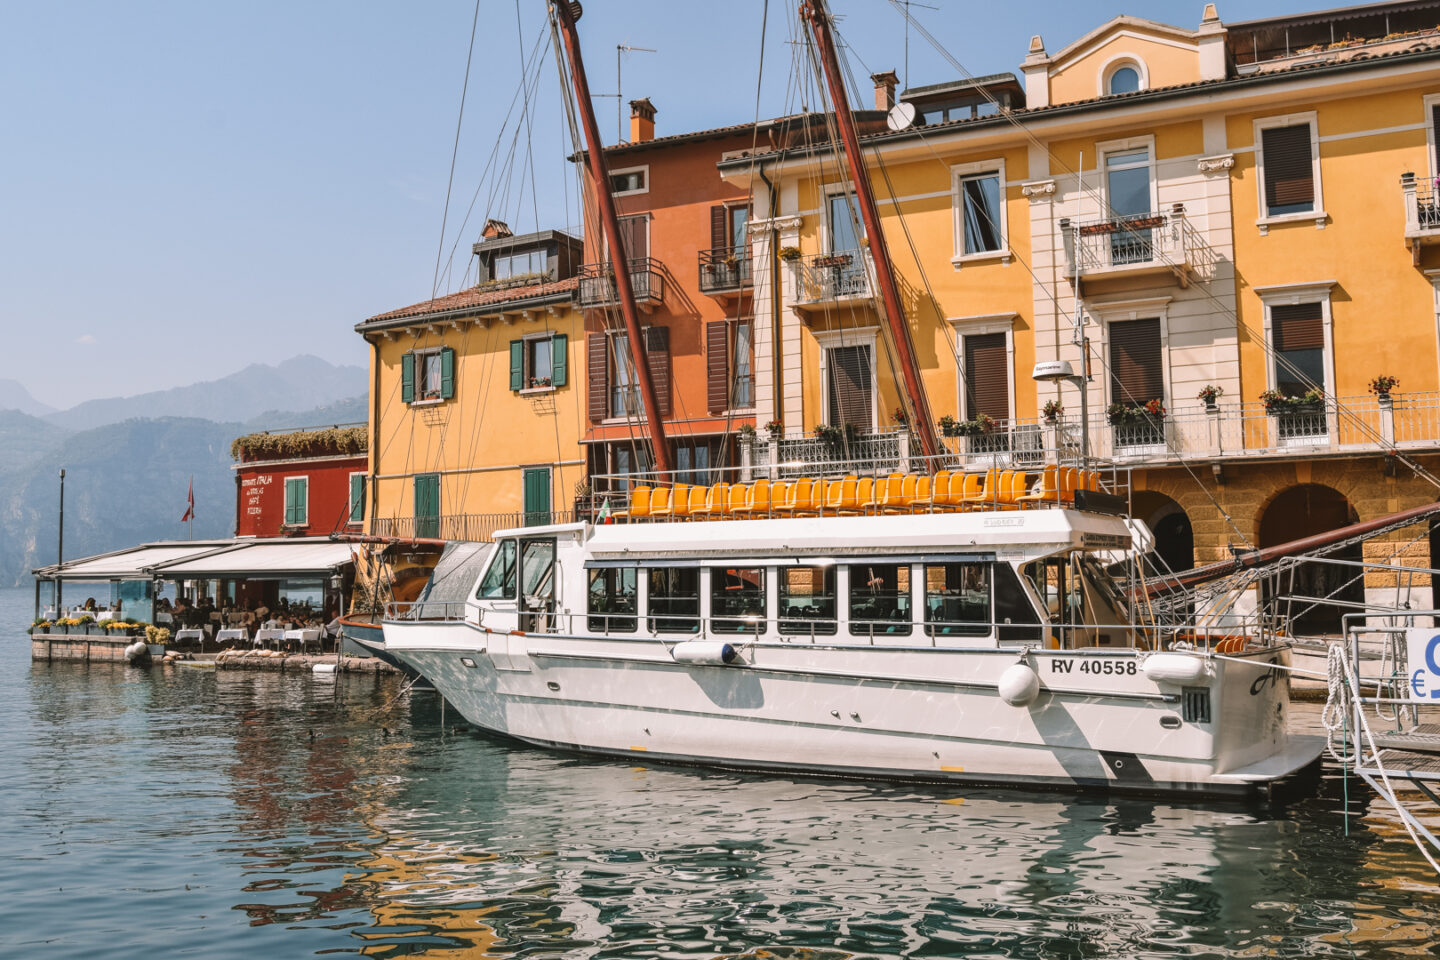 How to get around Lake Garda without a car - the foot passenger public boat around the lake